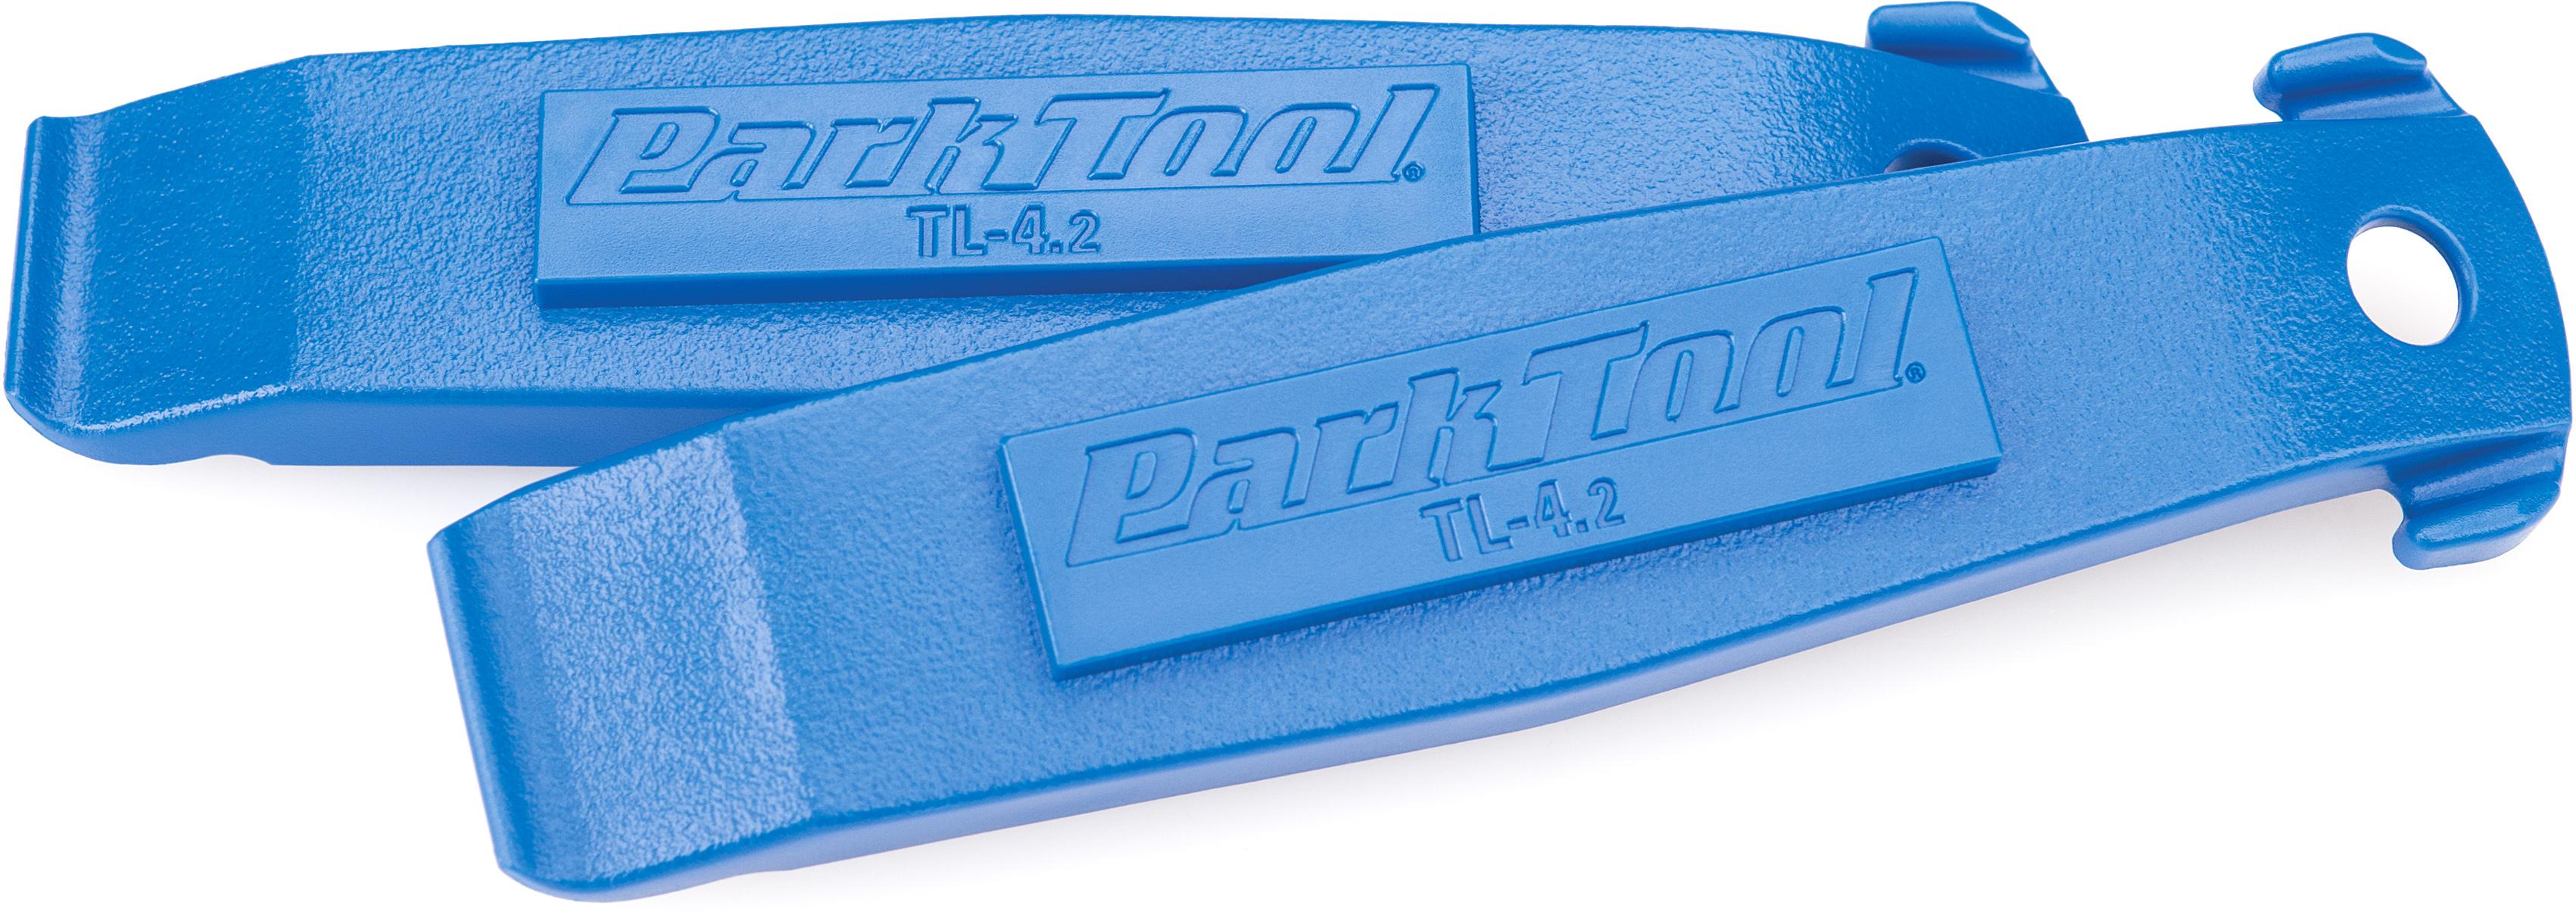 Park Tool Tyre Levers Tl-4.2c - Blue